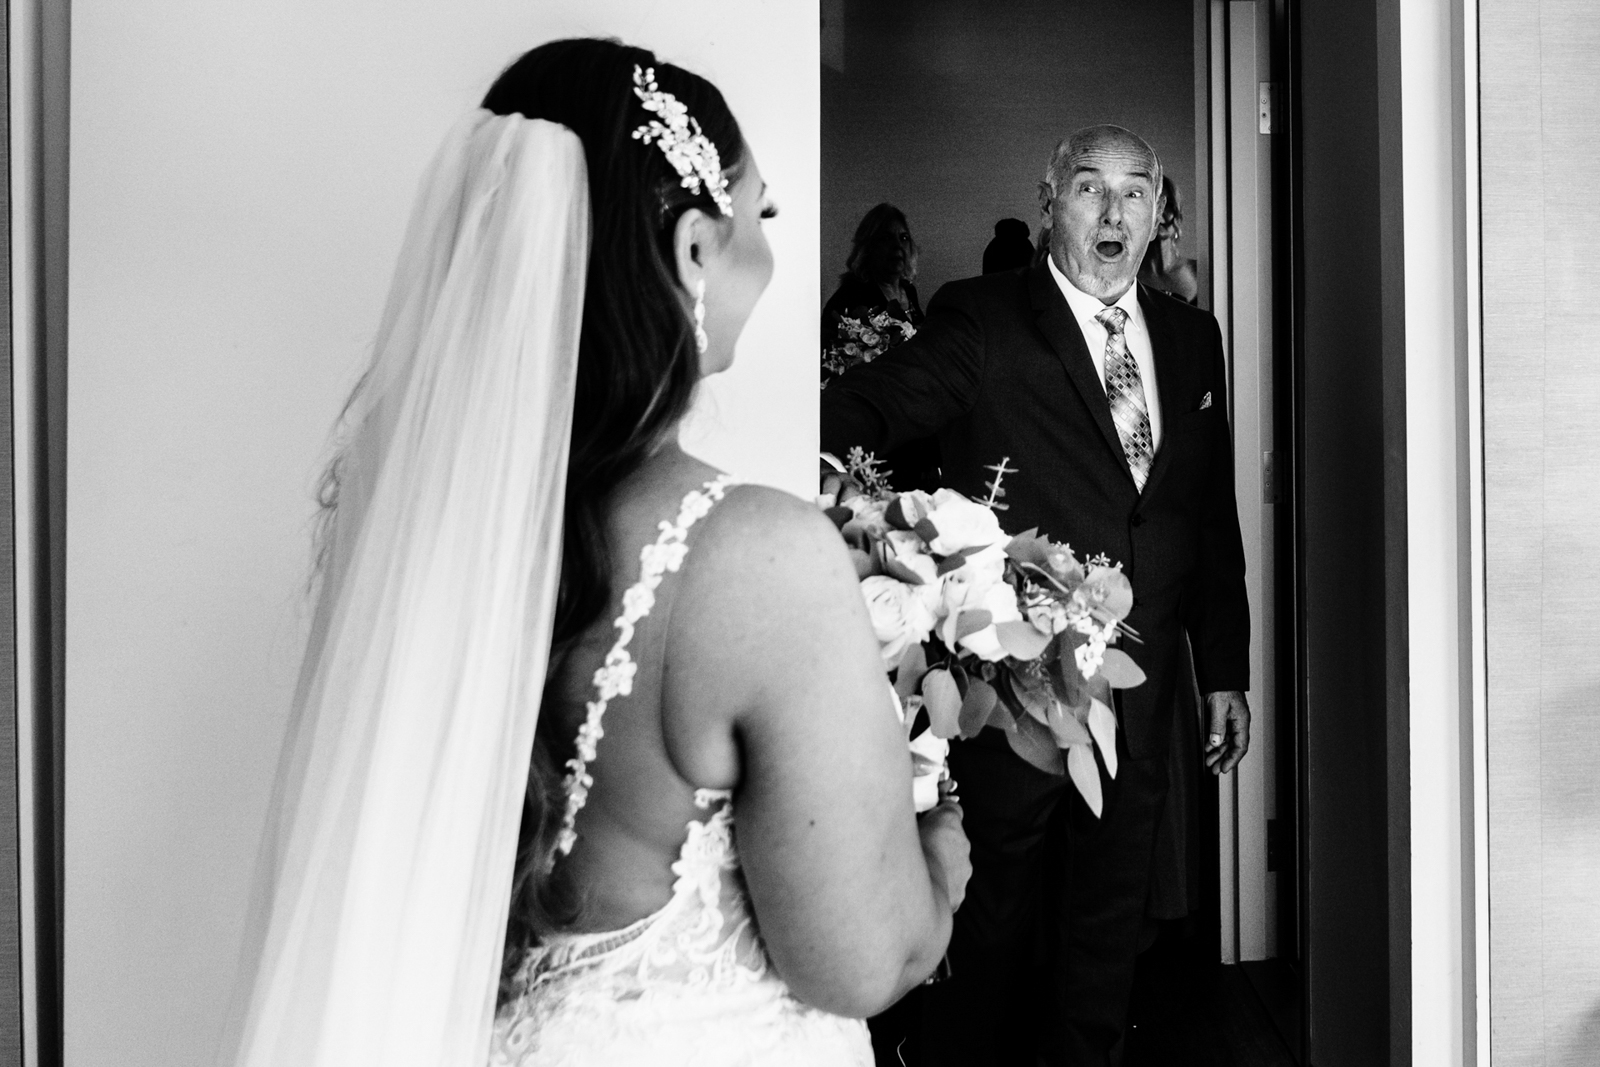 the bride and her father first looking on the wedding day 